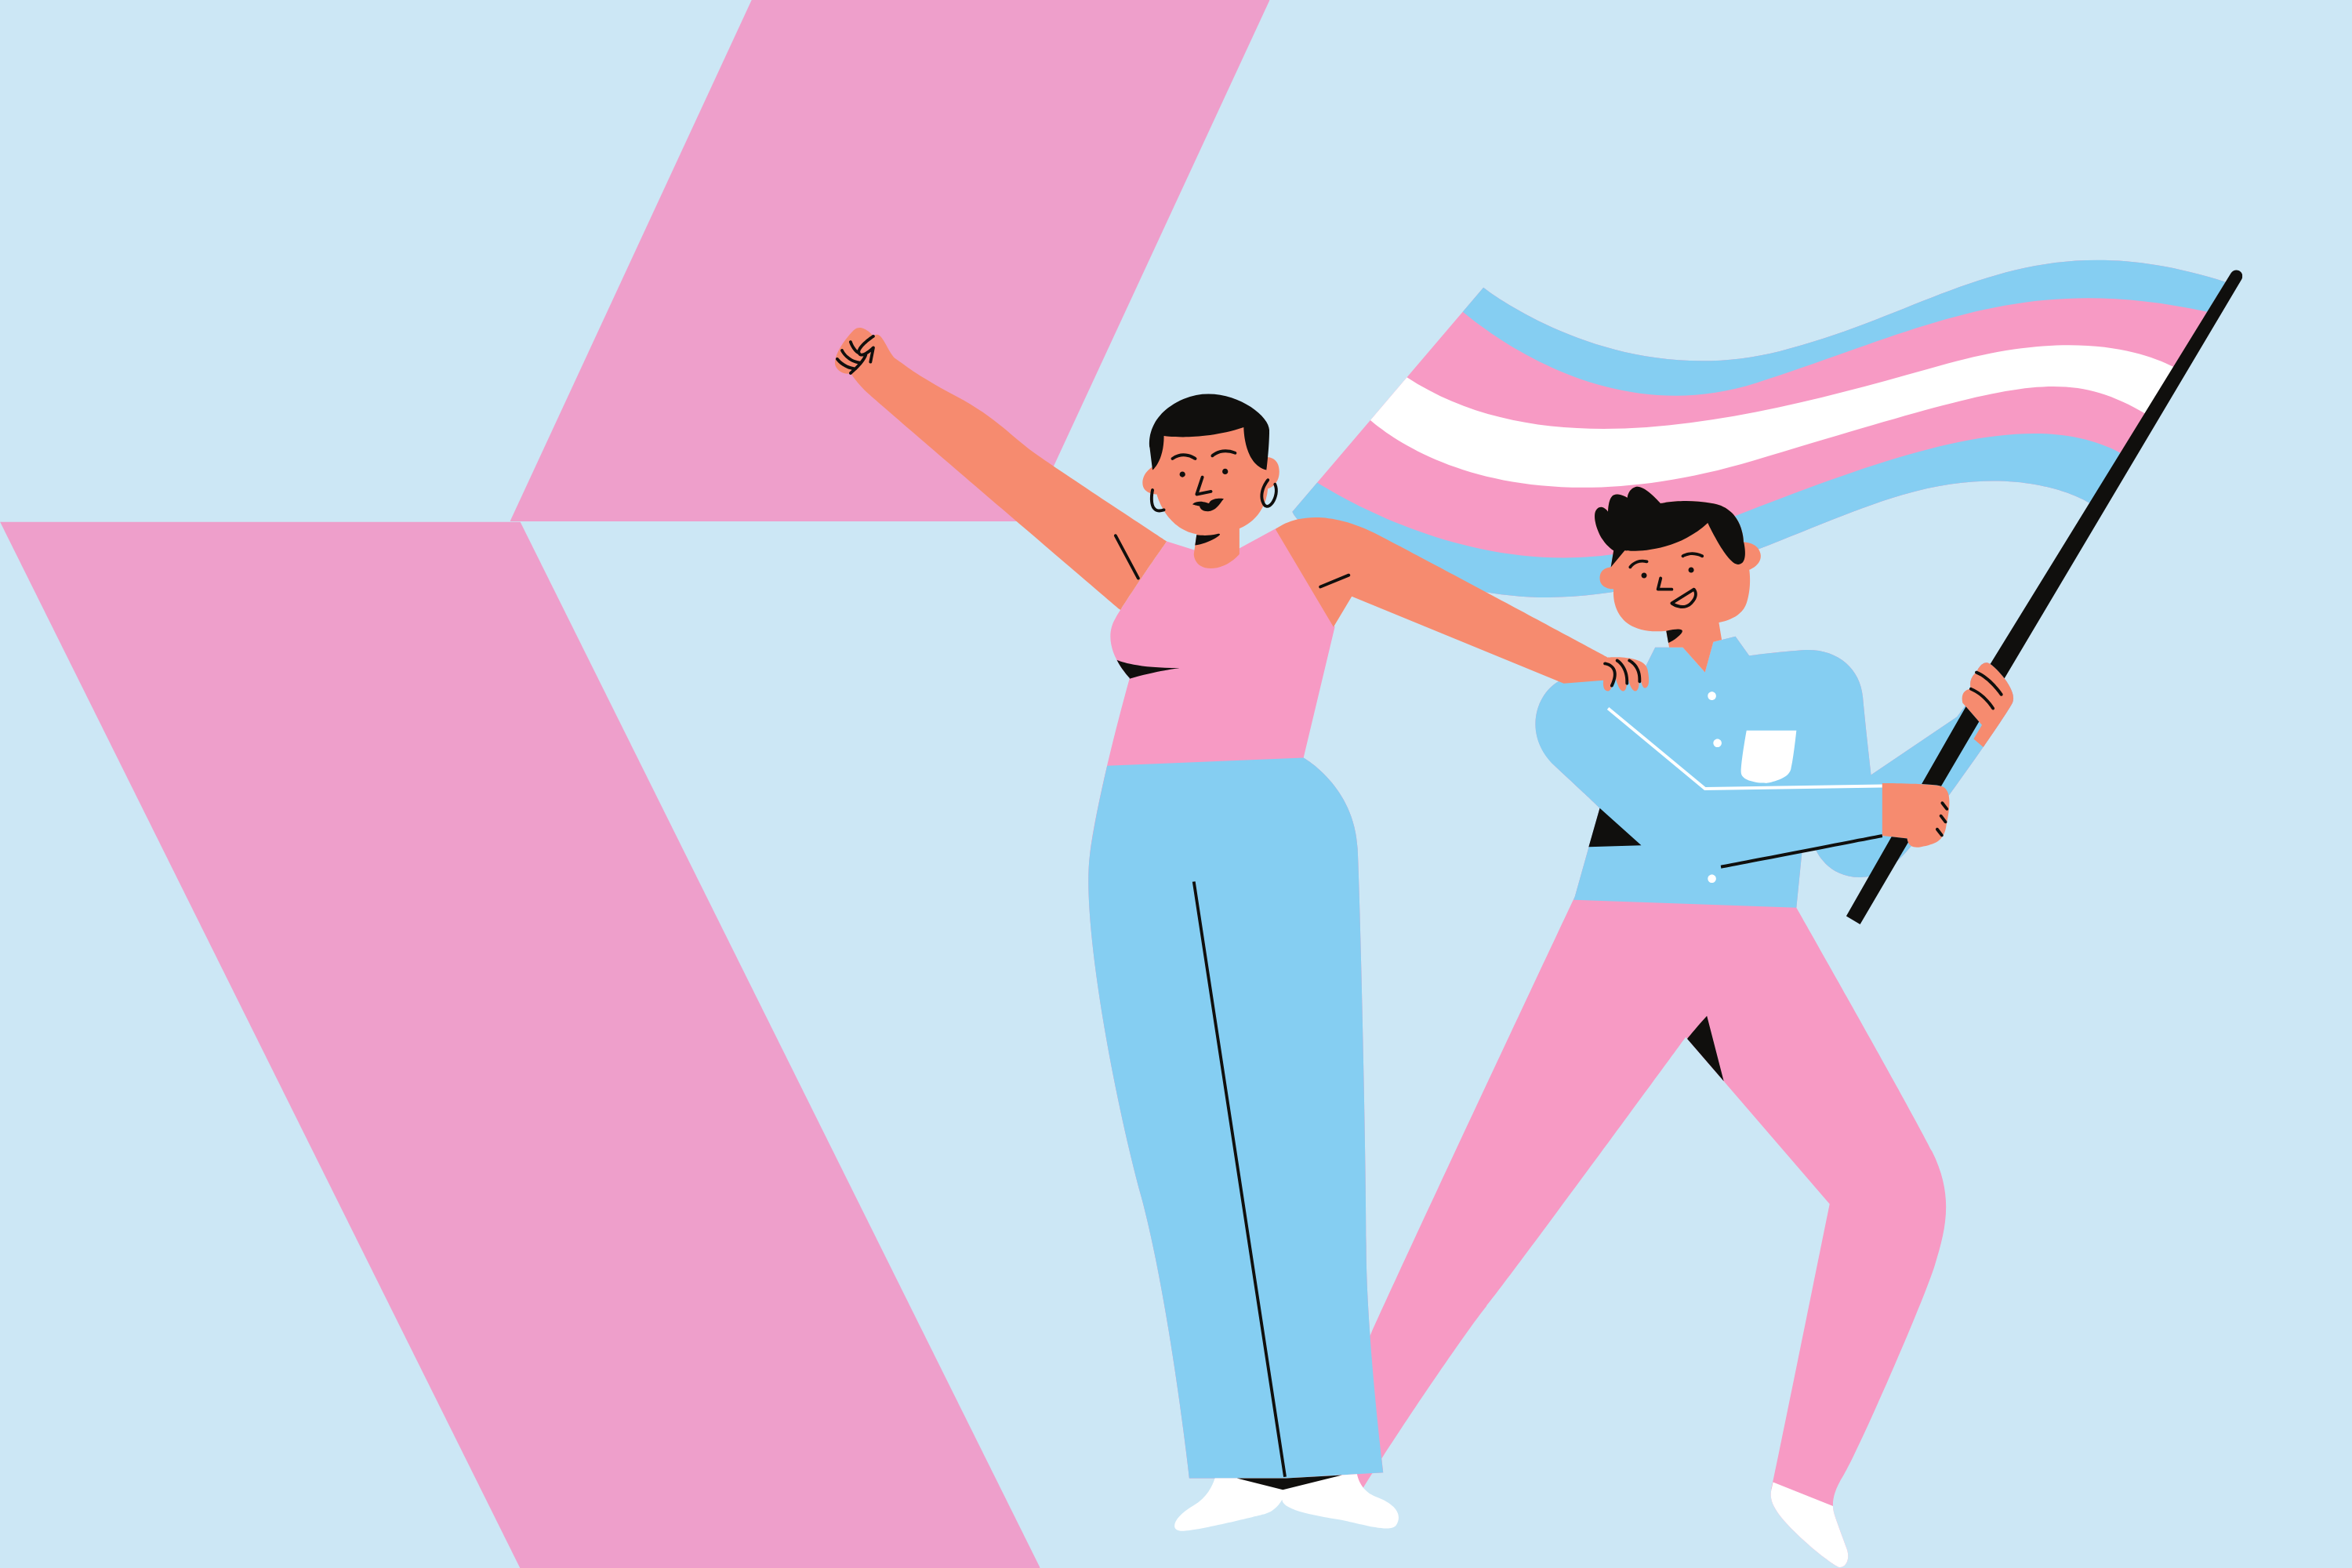 pale blue background with pink shapes and two cartoon people wearing pink and blue clothes, holding a trans flag (pink, blue and white) looking happy